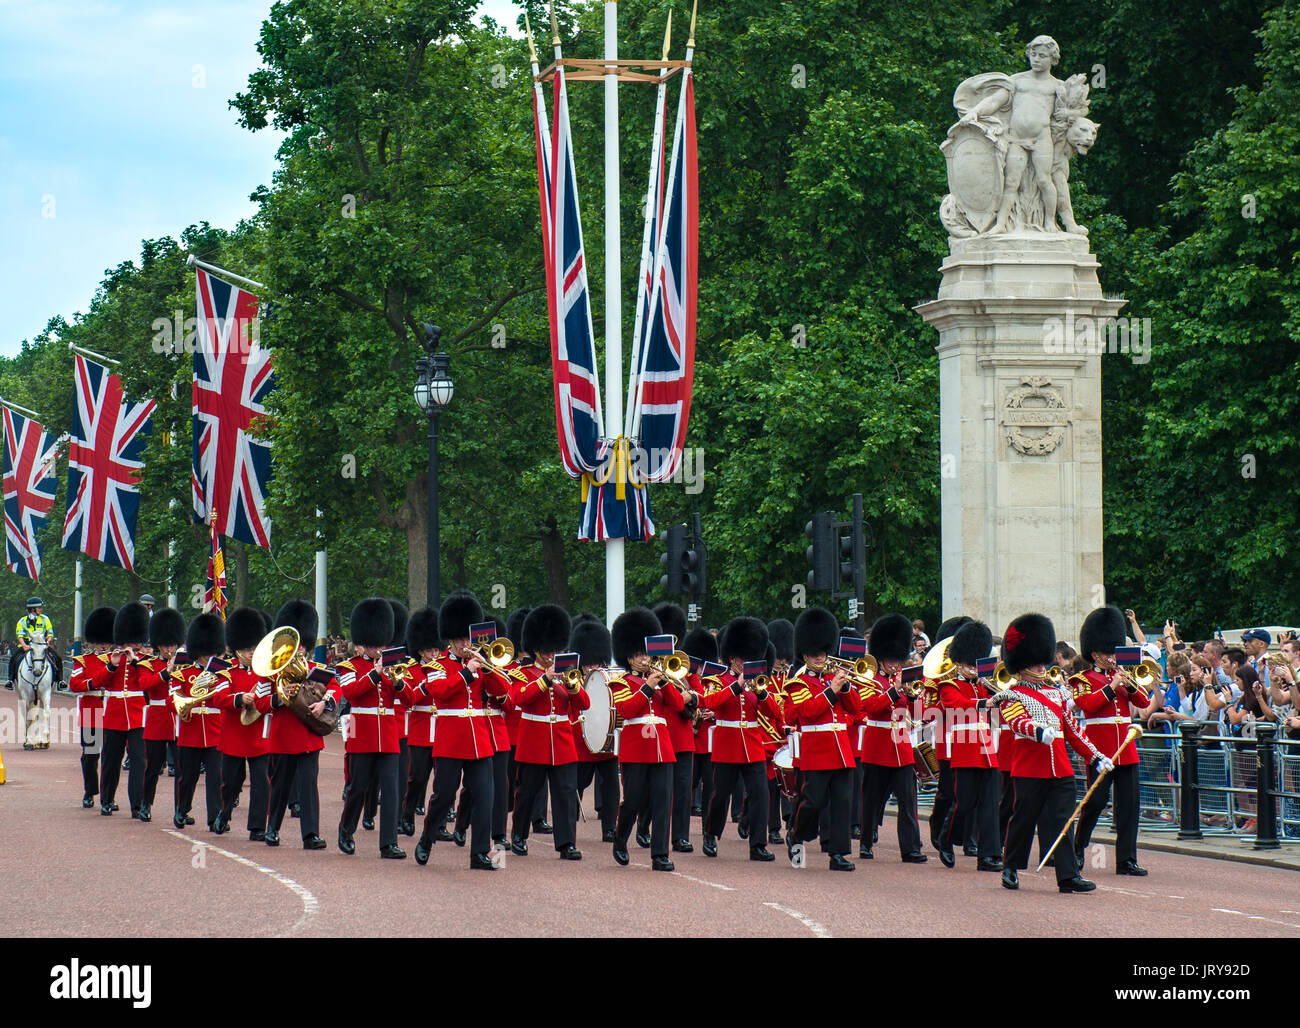 Royal Guard, Changing of the Guards, London, England, United Kingdom Stock Photo